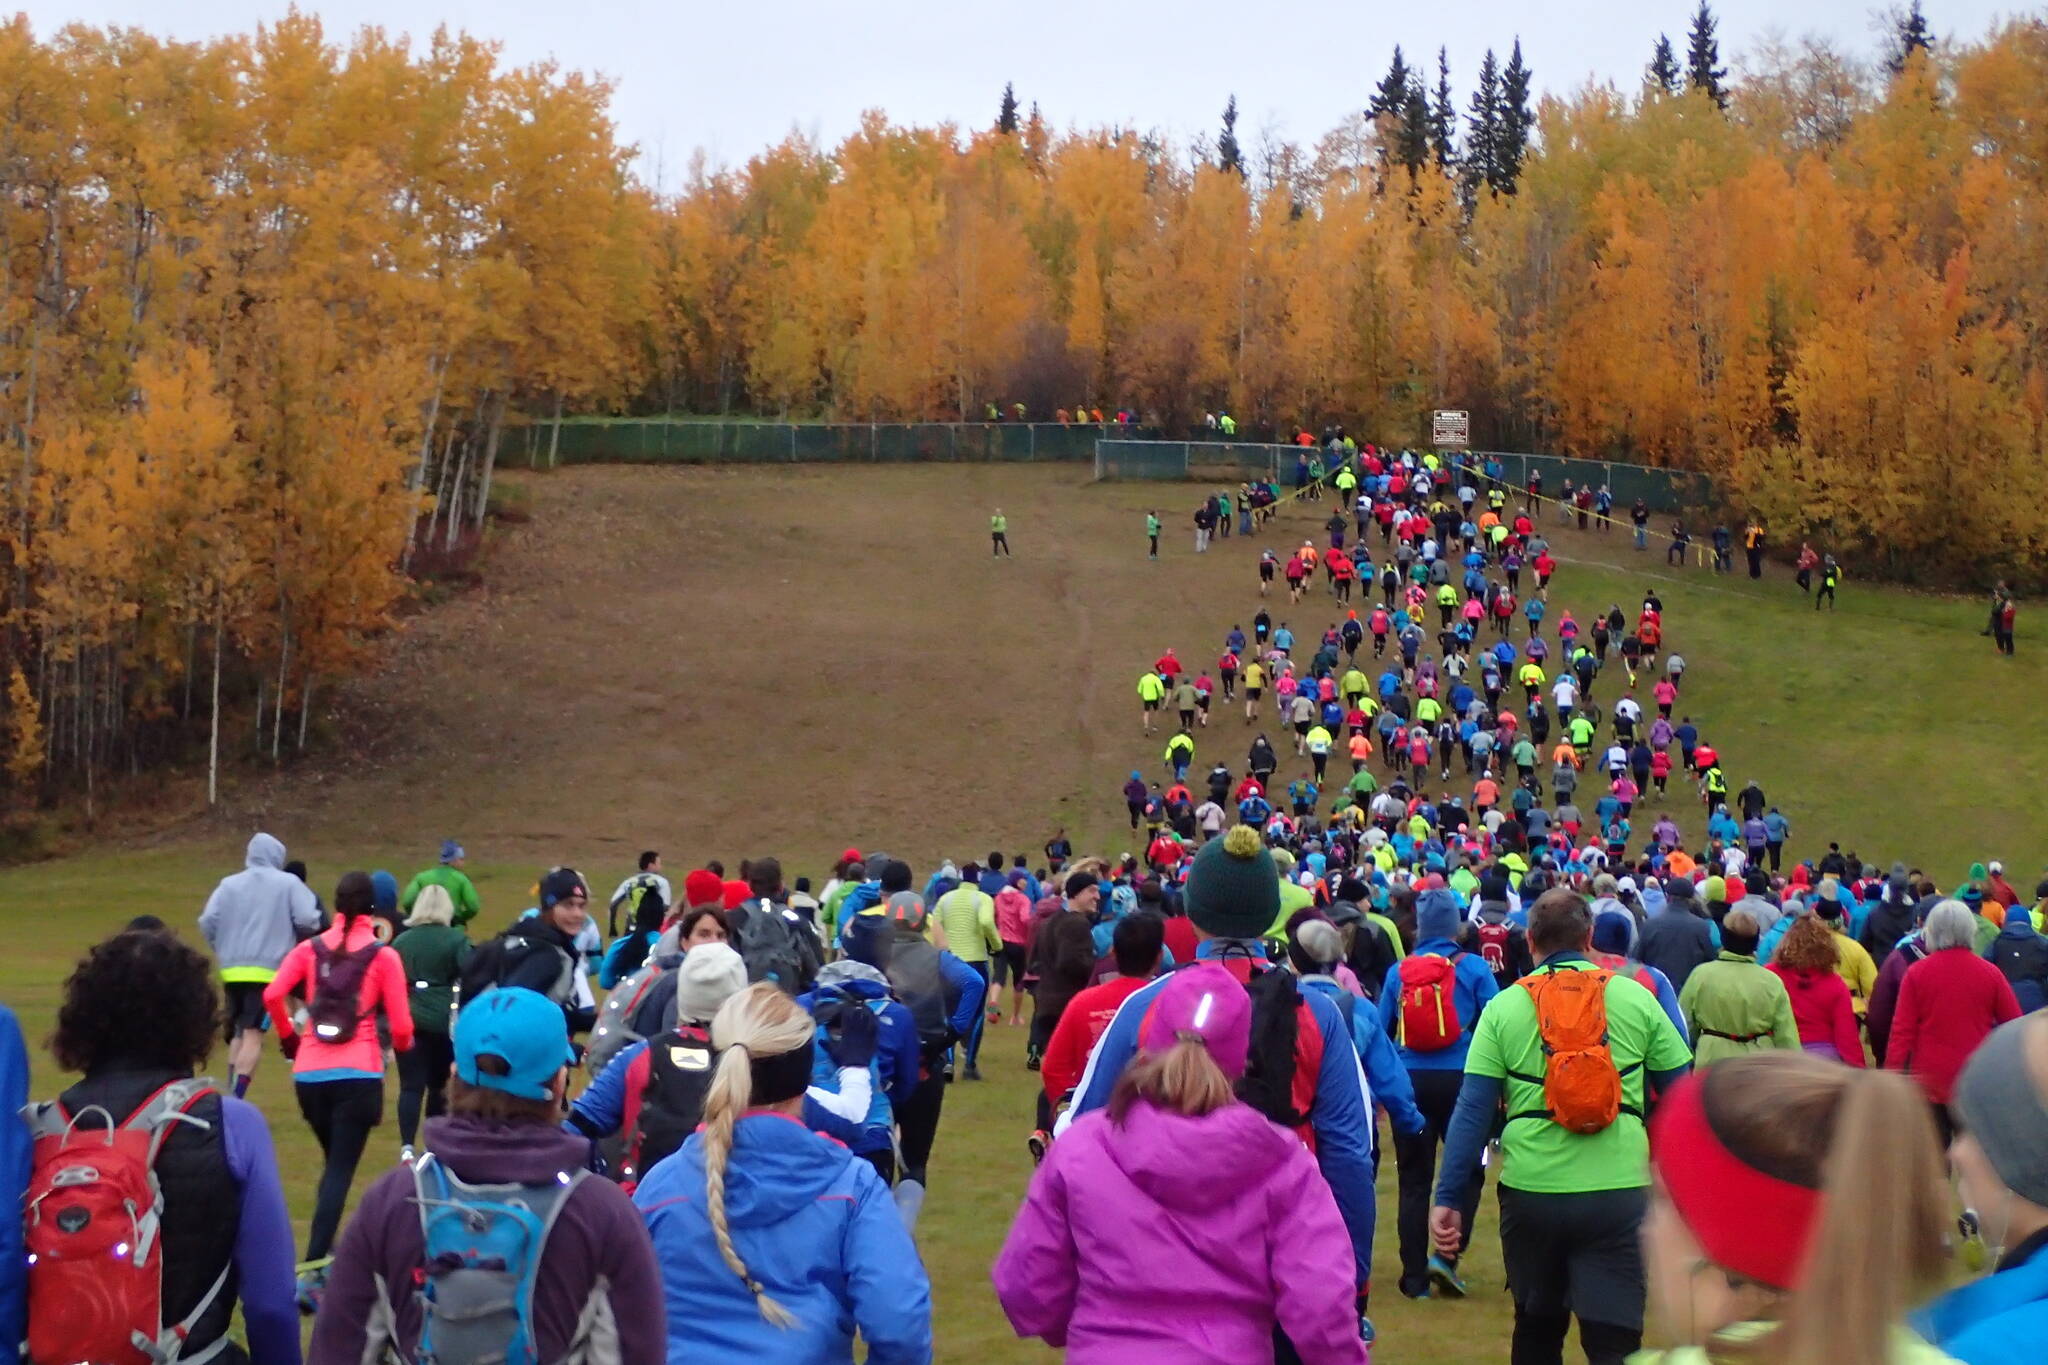 Runners ascend the old ski hill on the campus of the University of Alaska Fairbanks at the start of the 2015 Equinox Marathon. (Photo by Ned Rozell)